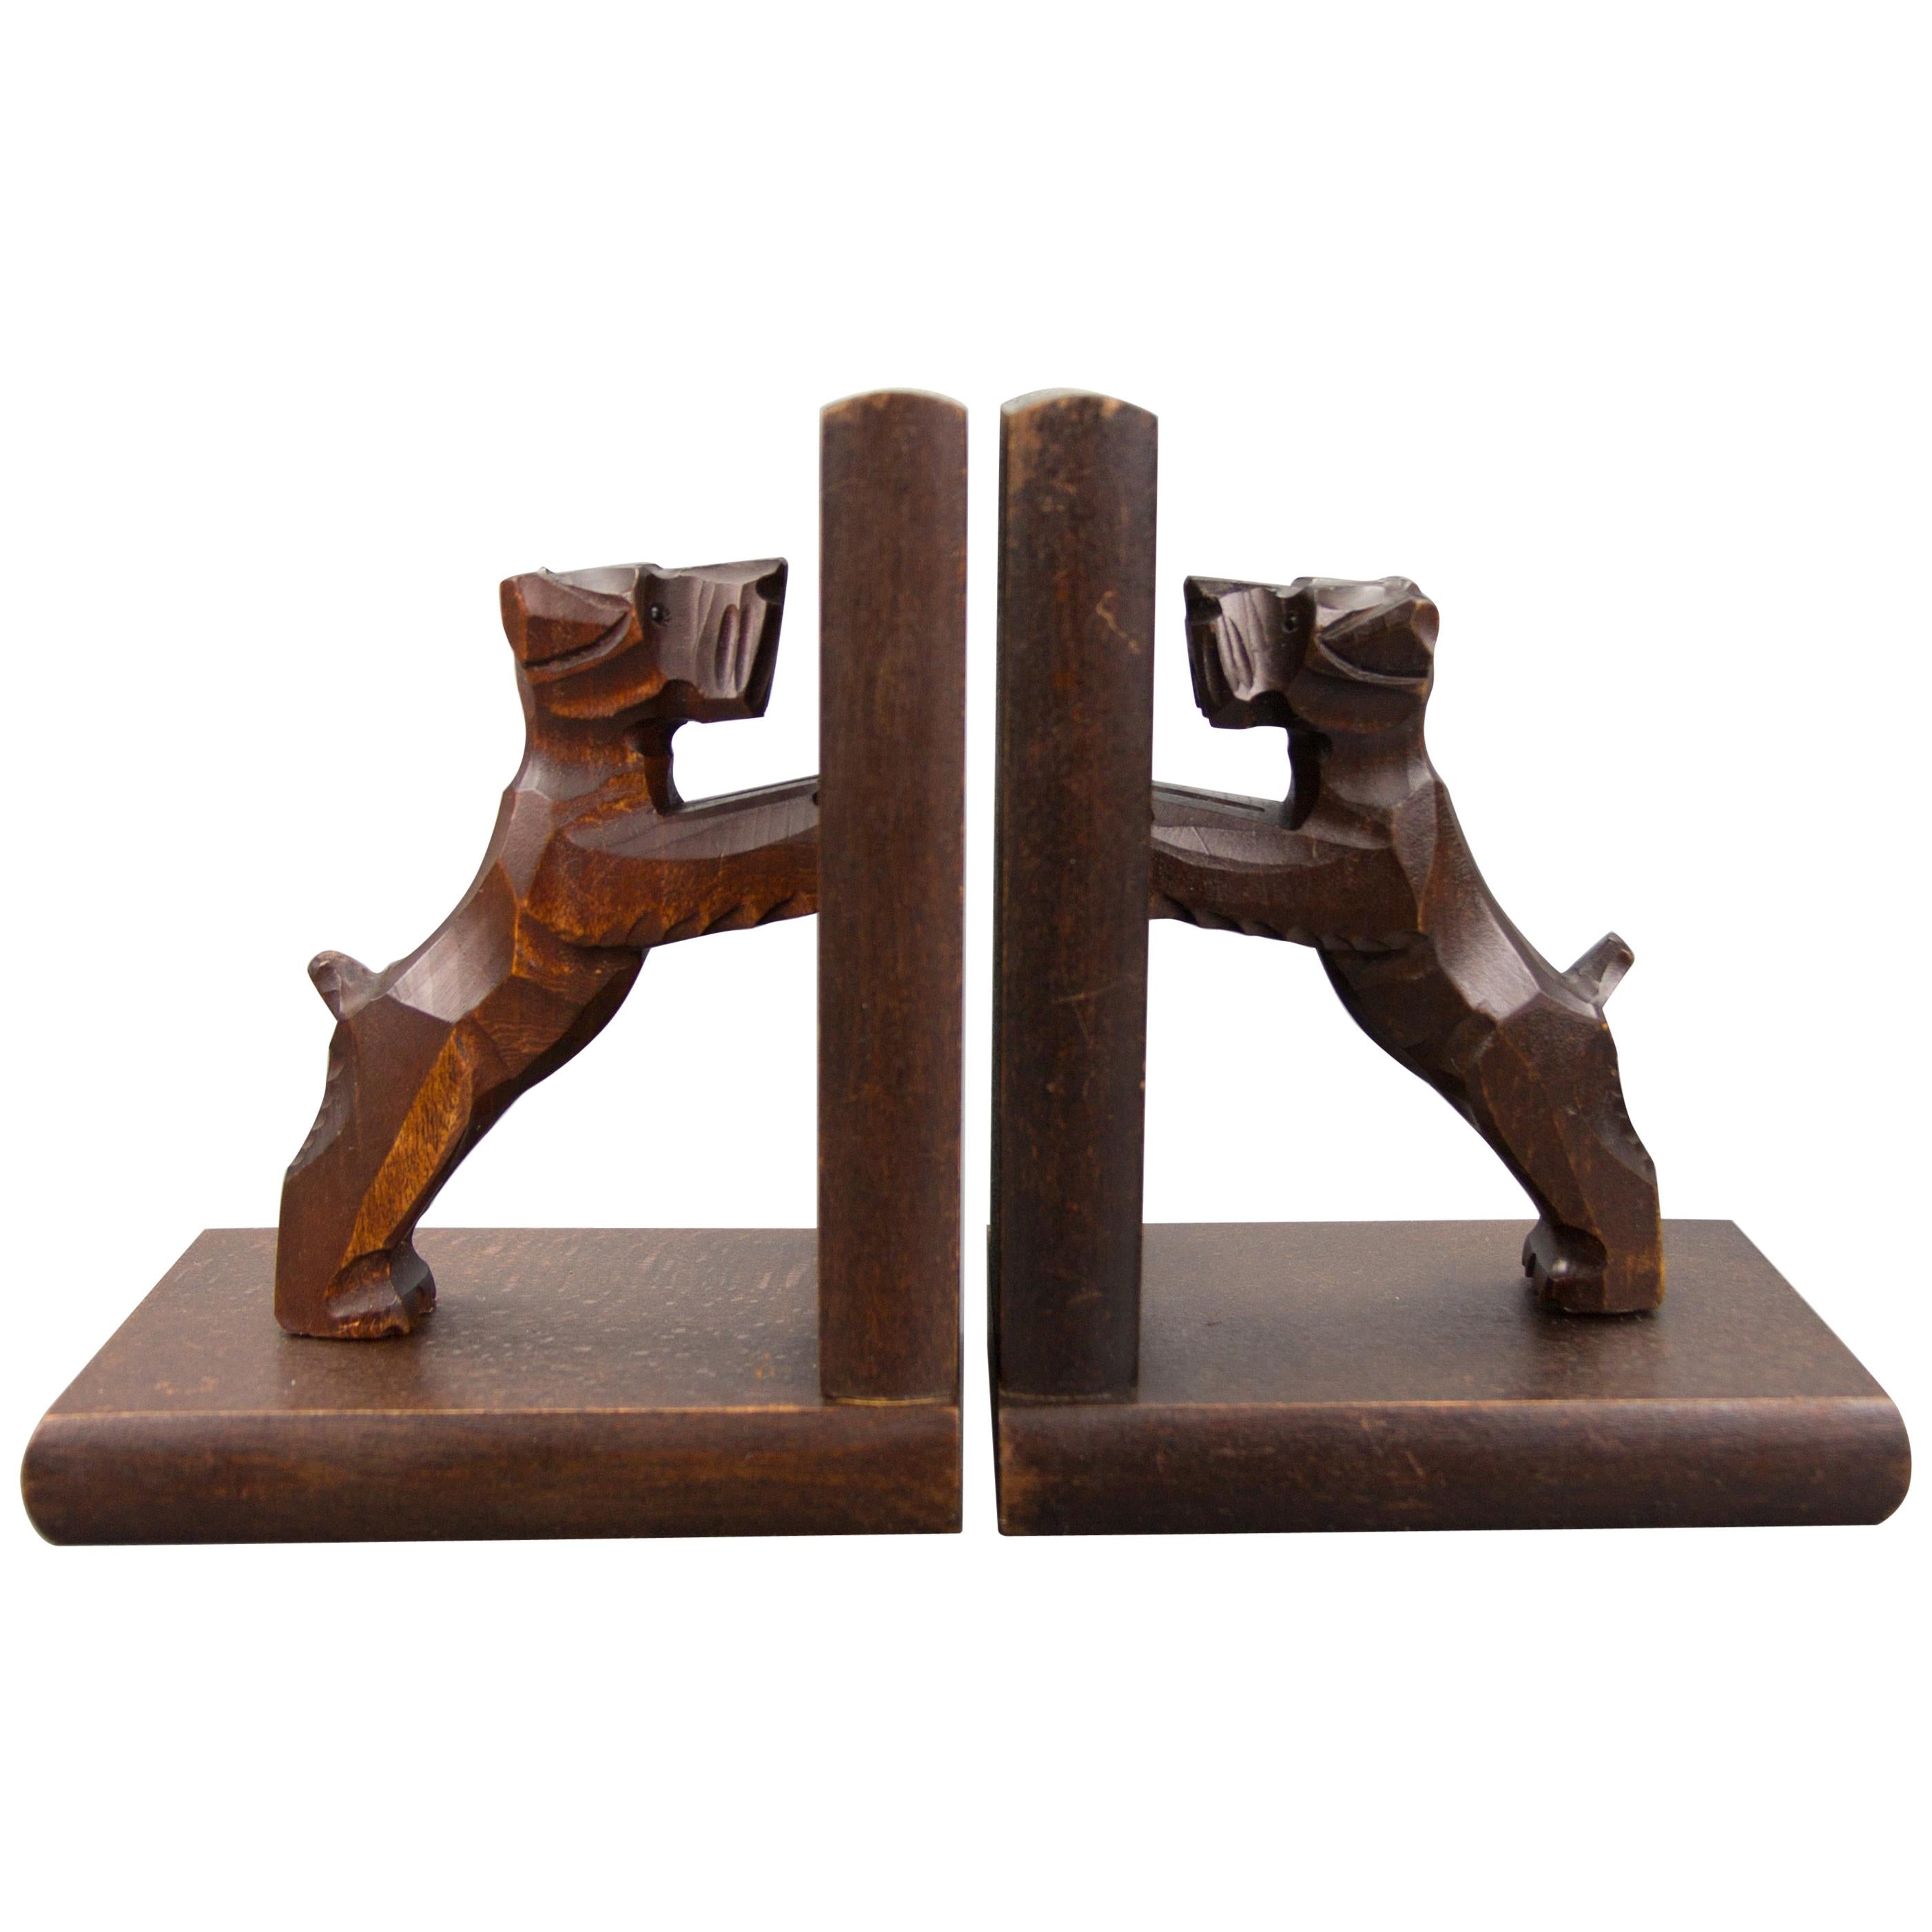 Hand Carved Terrier Wooden Bookends by Dörsch Oberweid, Germany